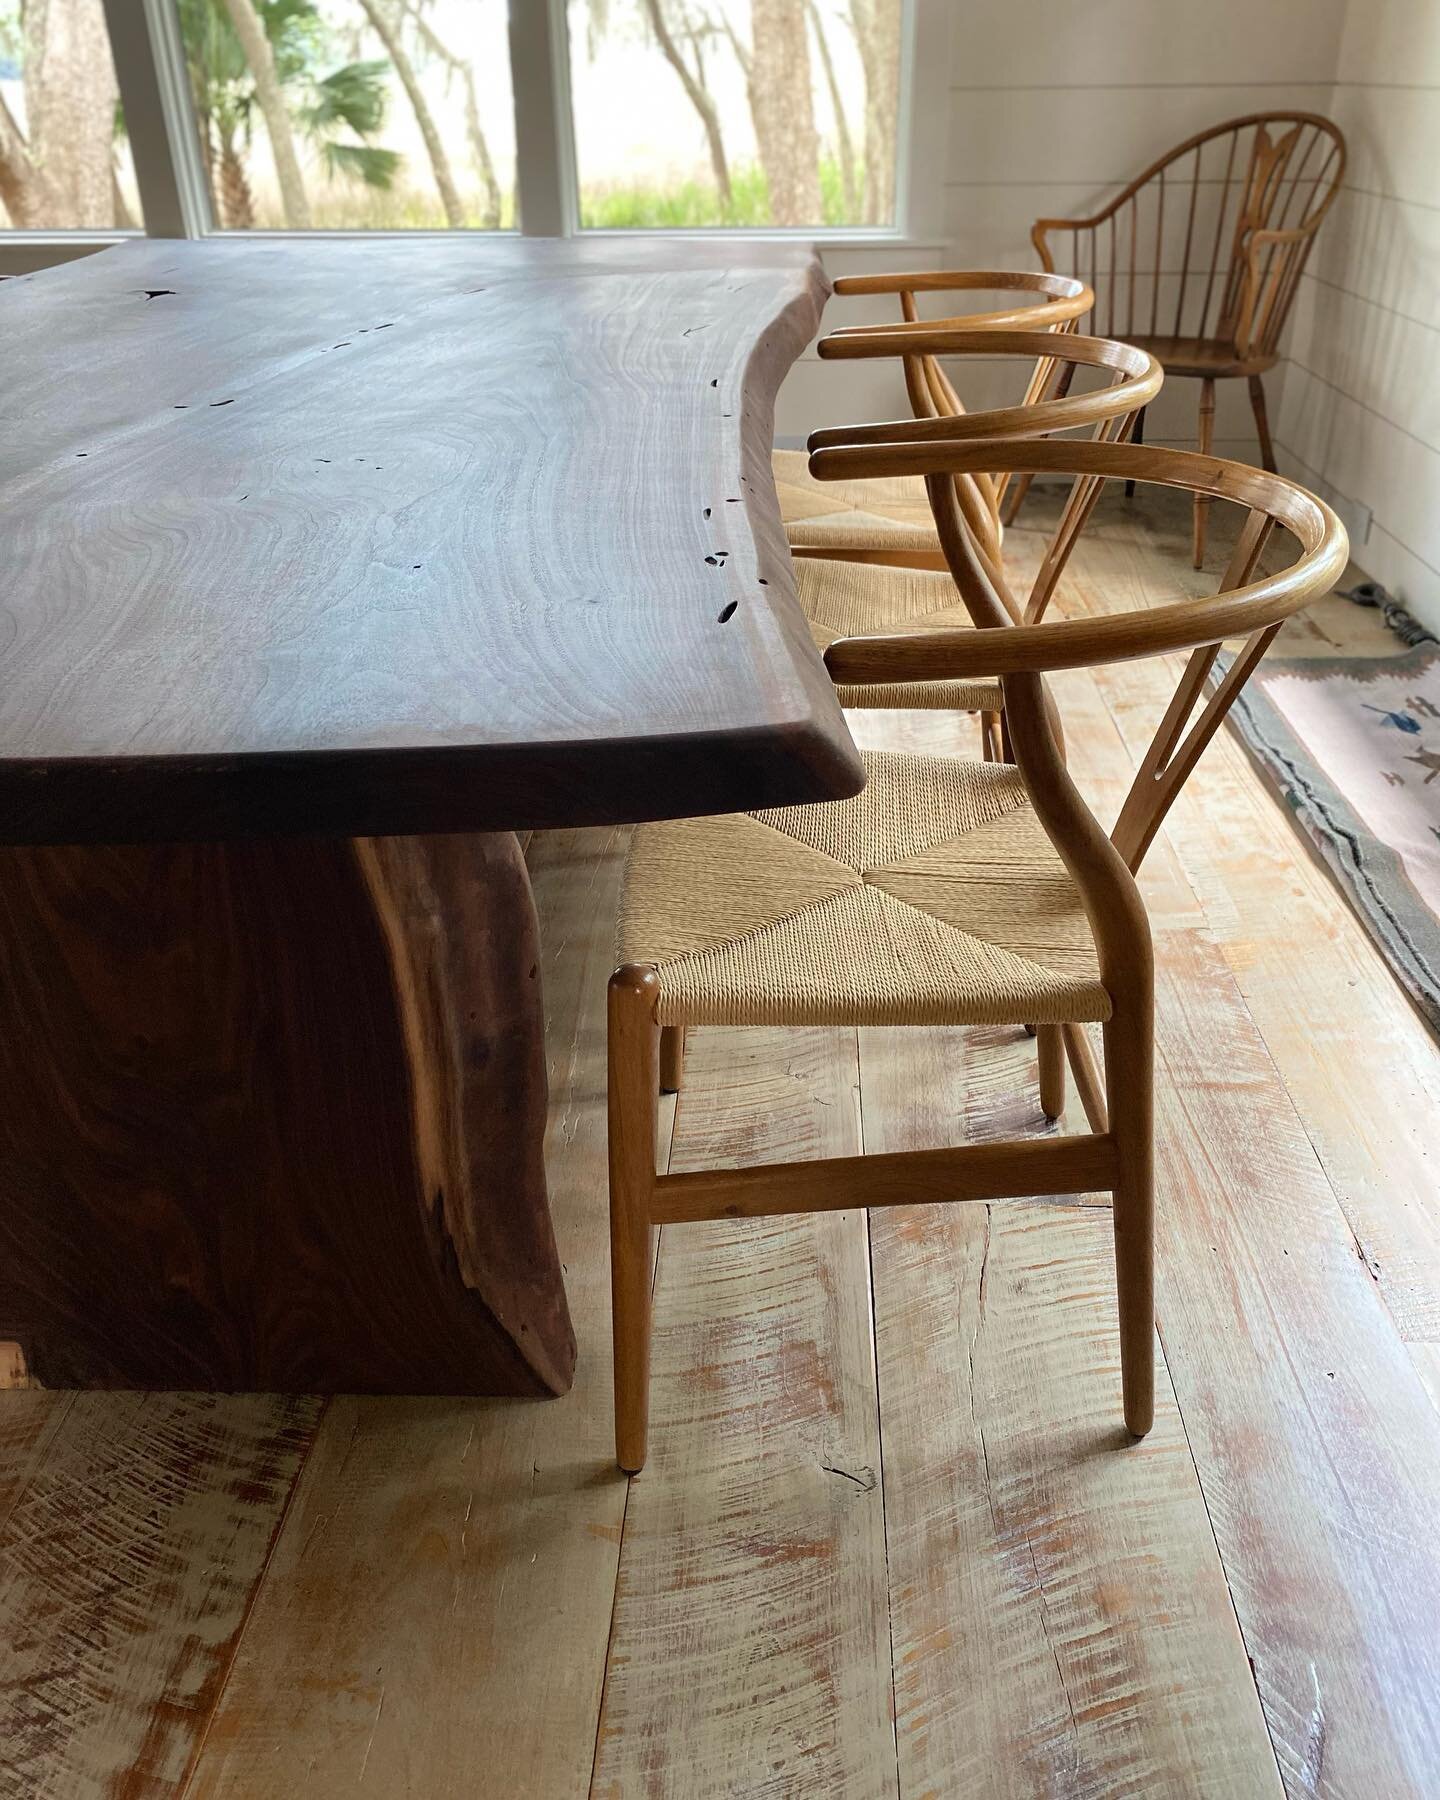 Handcrafted Custom Furniture // Live Edge Walnut Table
.
.
The story behind this piece is quite remarkable.  The journey began when we were contacted to bring our mobile mill to salvage a Black Walnut that had been damaged during a storm.  The tree r